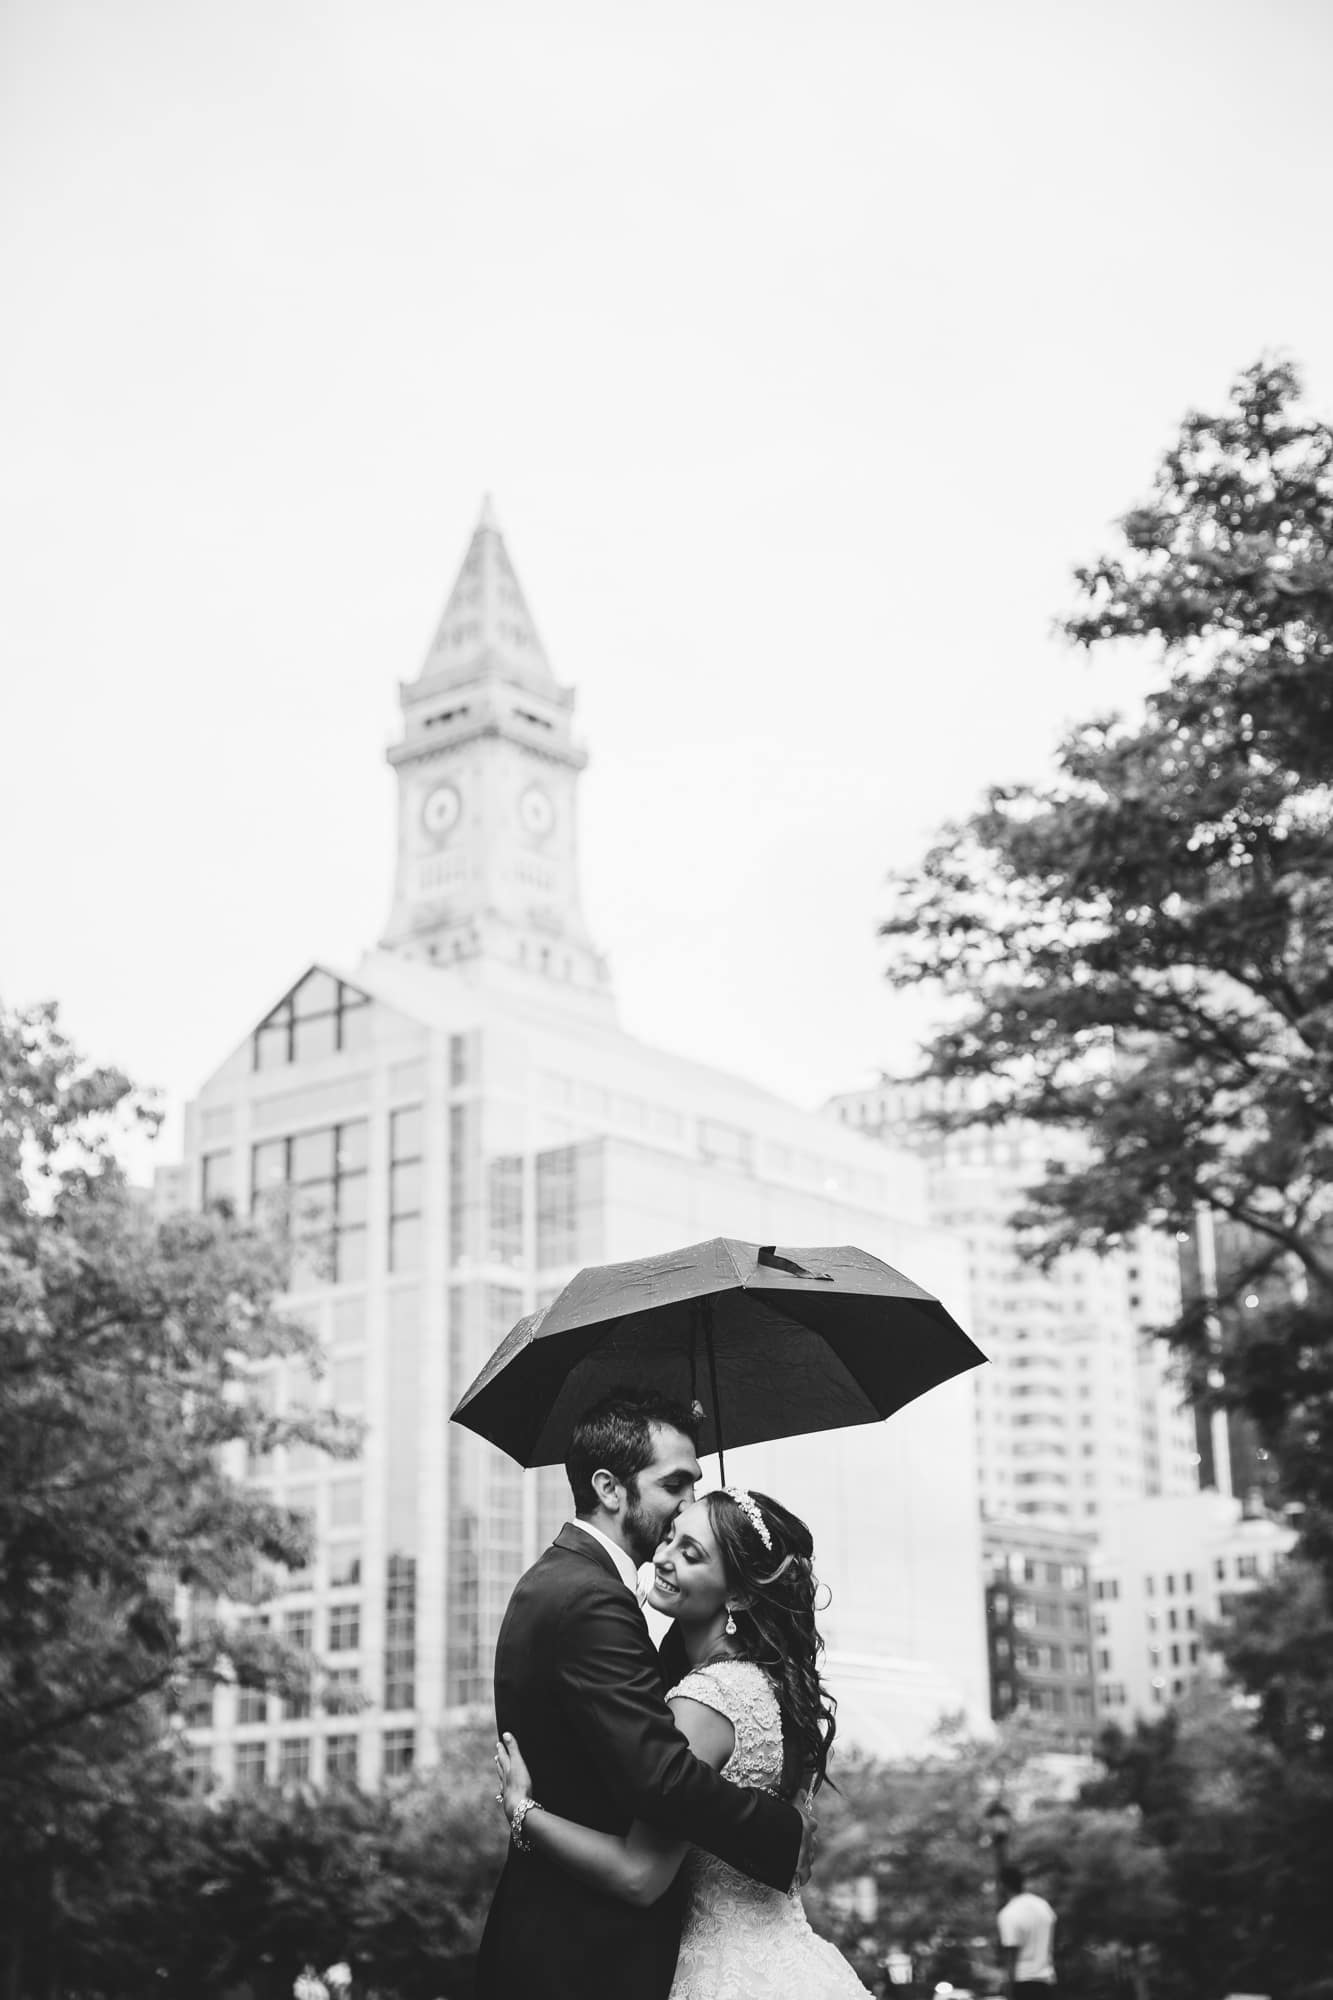 A documentary photograph of a couple hugging under an umbrella during a rainy State Room Wedding in Boston, Massachusetts